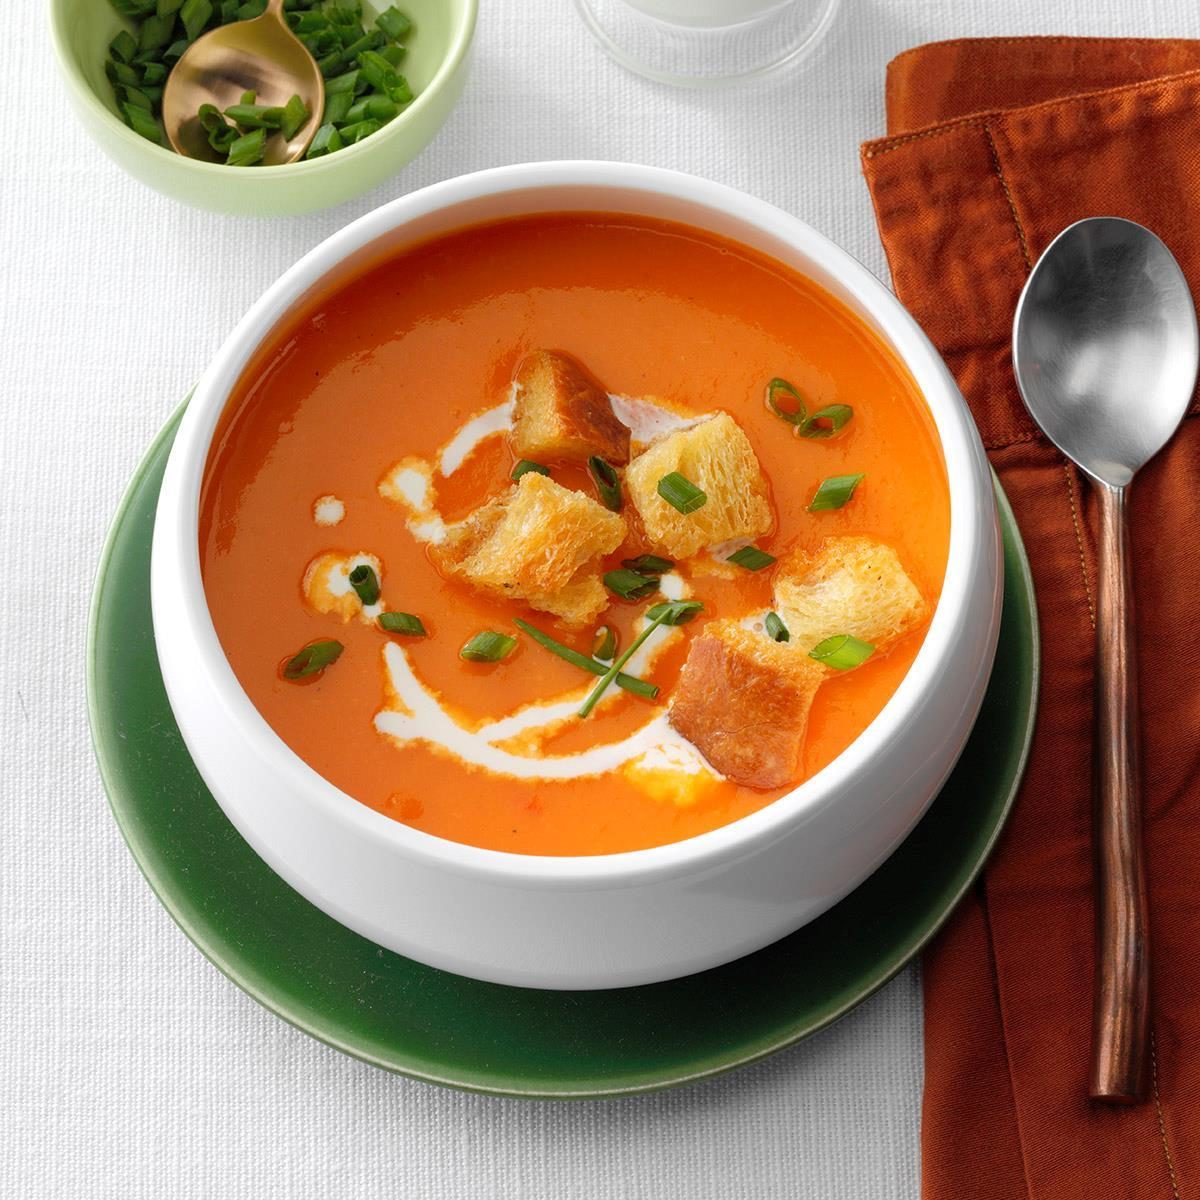 Creamy Red Pepper Soup Recipe How To Make It